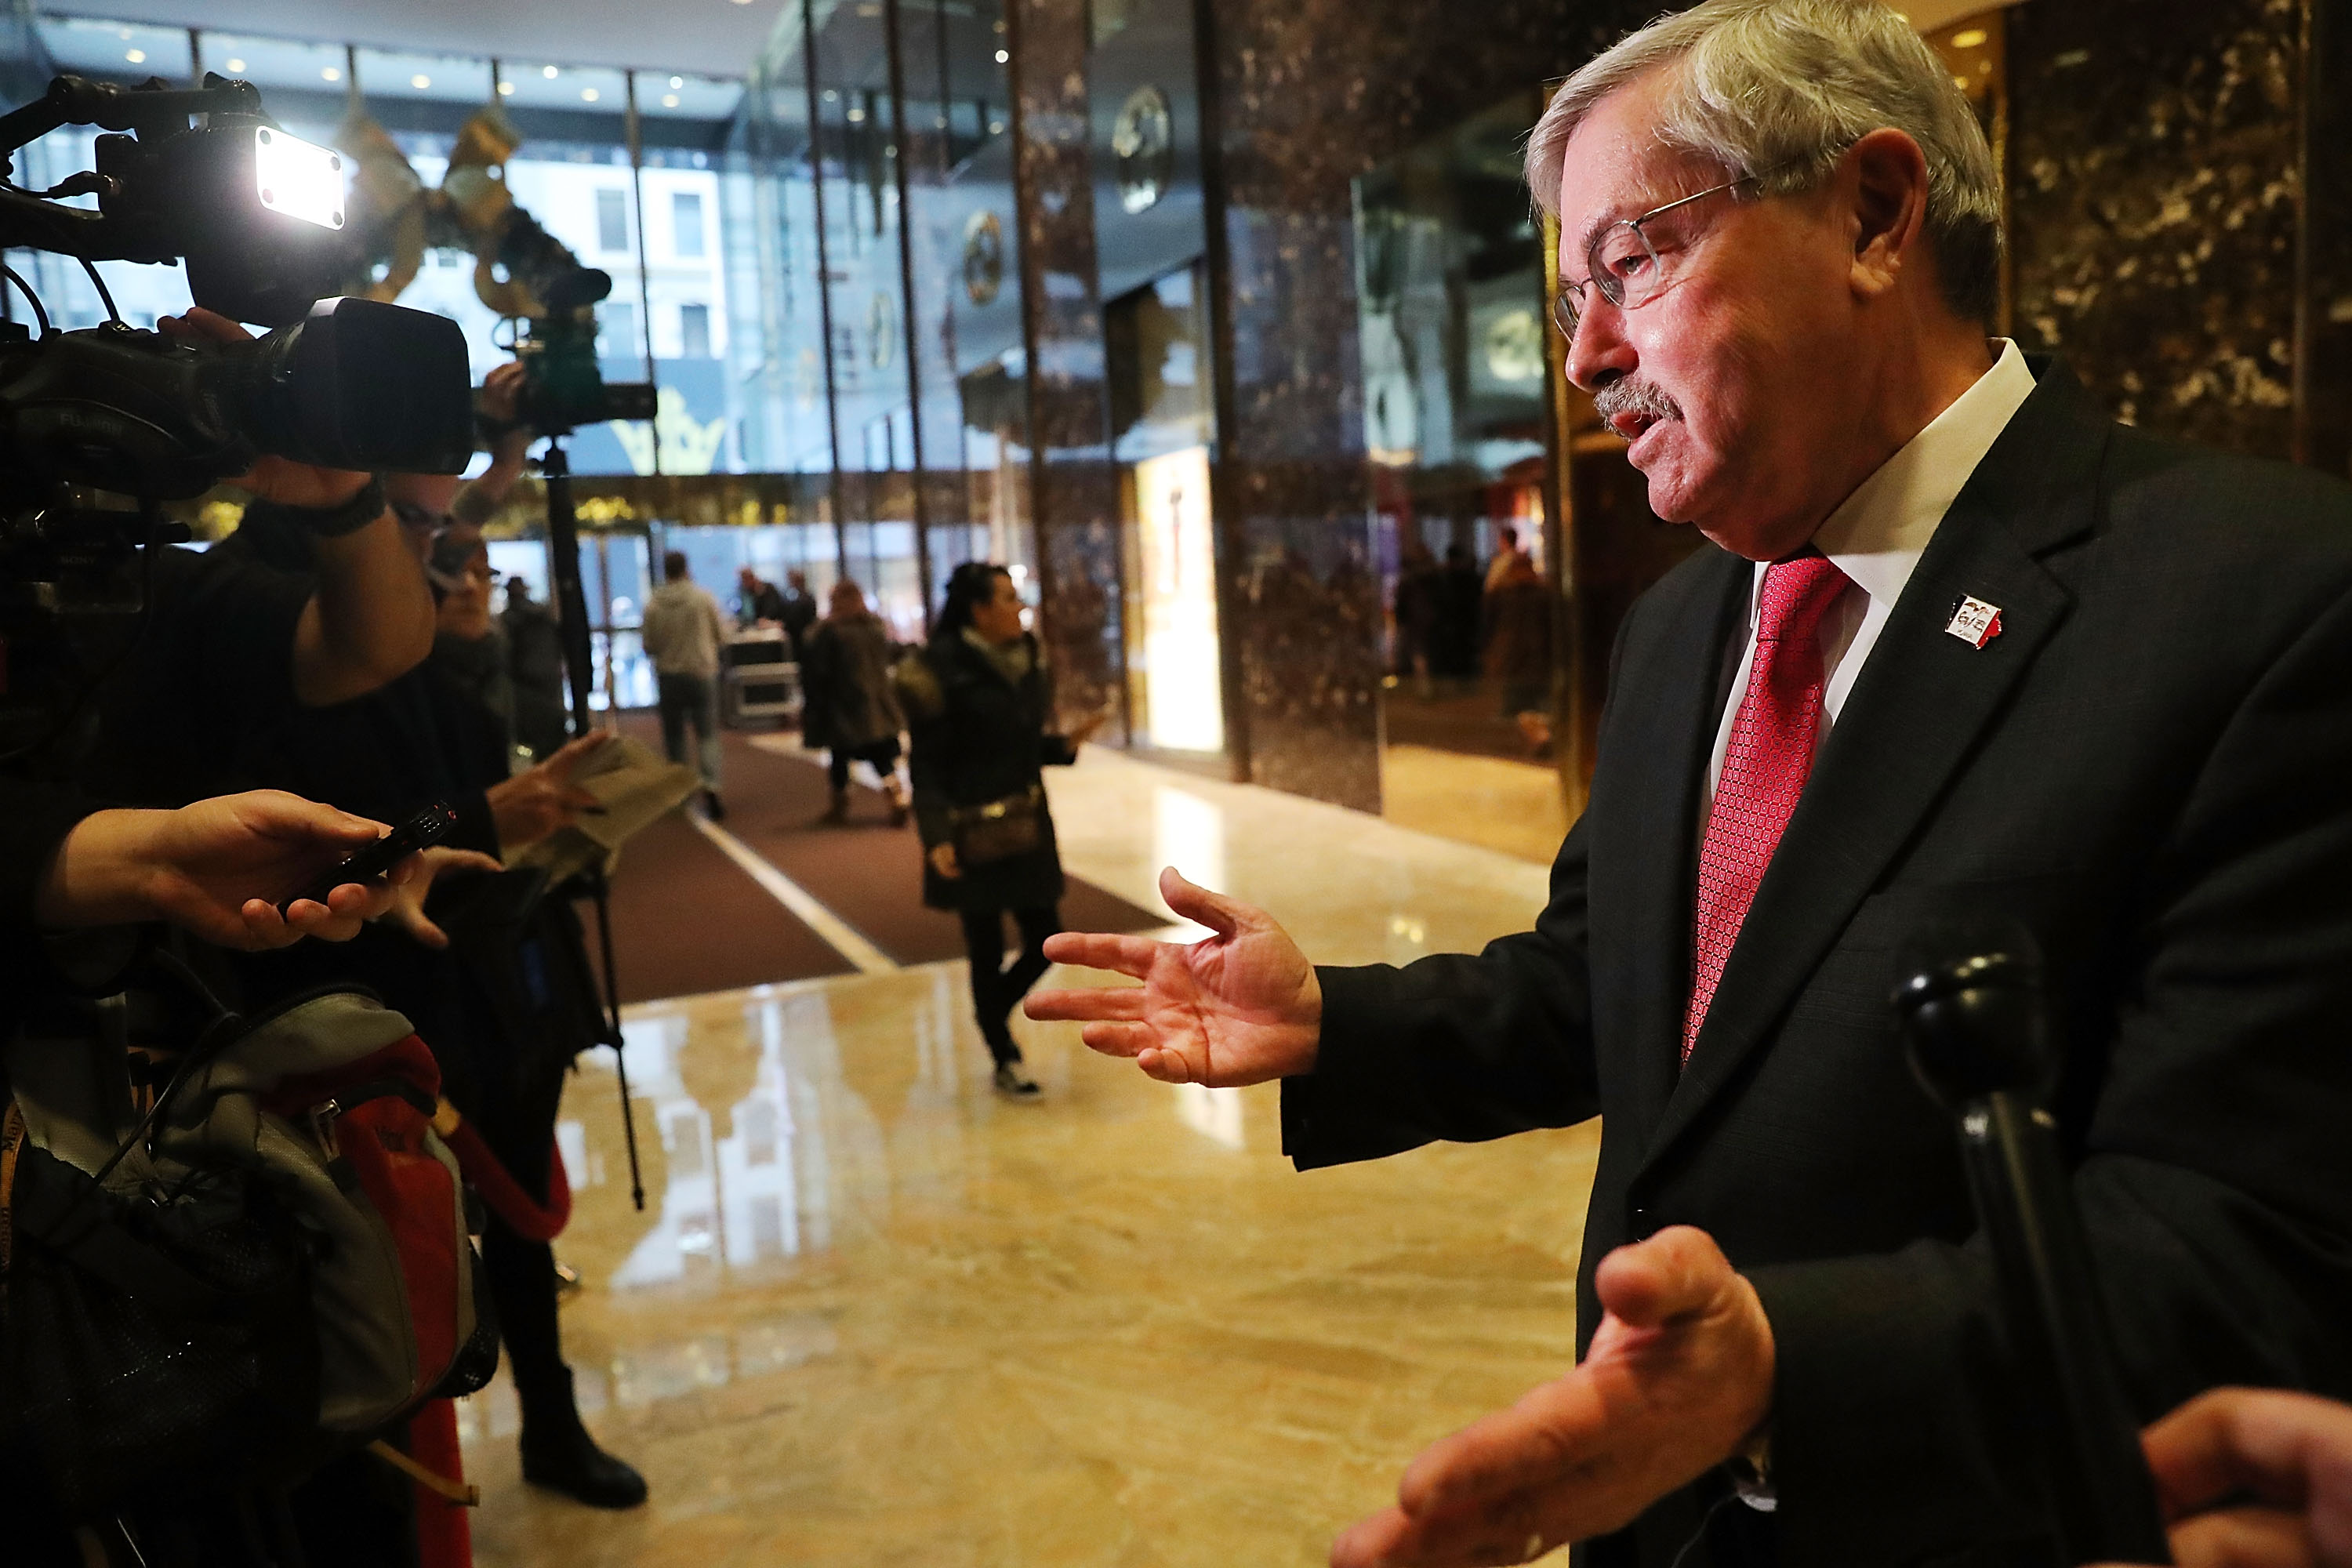 Iowa Gov. Terry Branstad speaks with members of the media at Trump Tower following meetings on December 6, 2016 in New York City. (Spencer Platt—Getty Images)